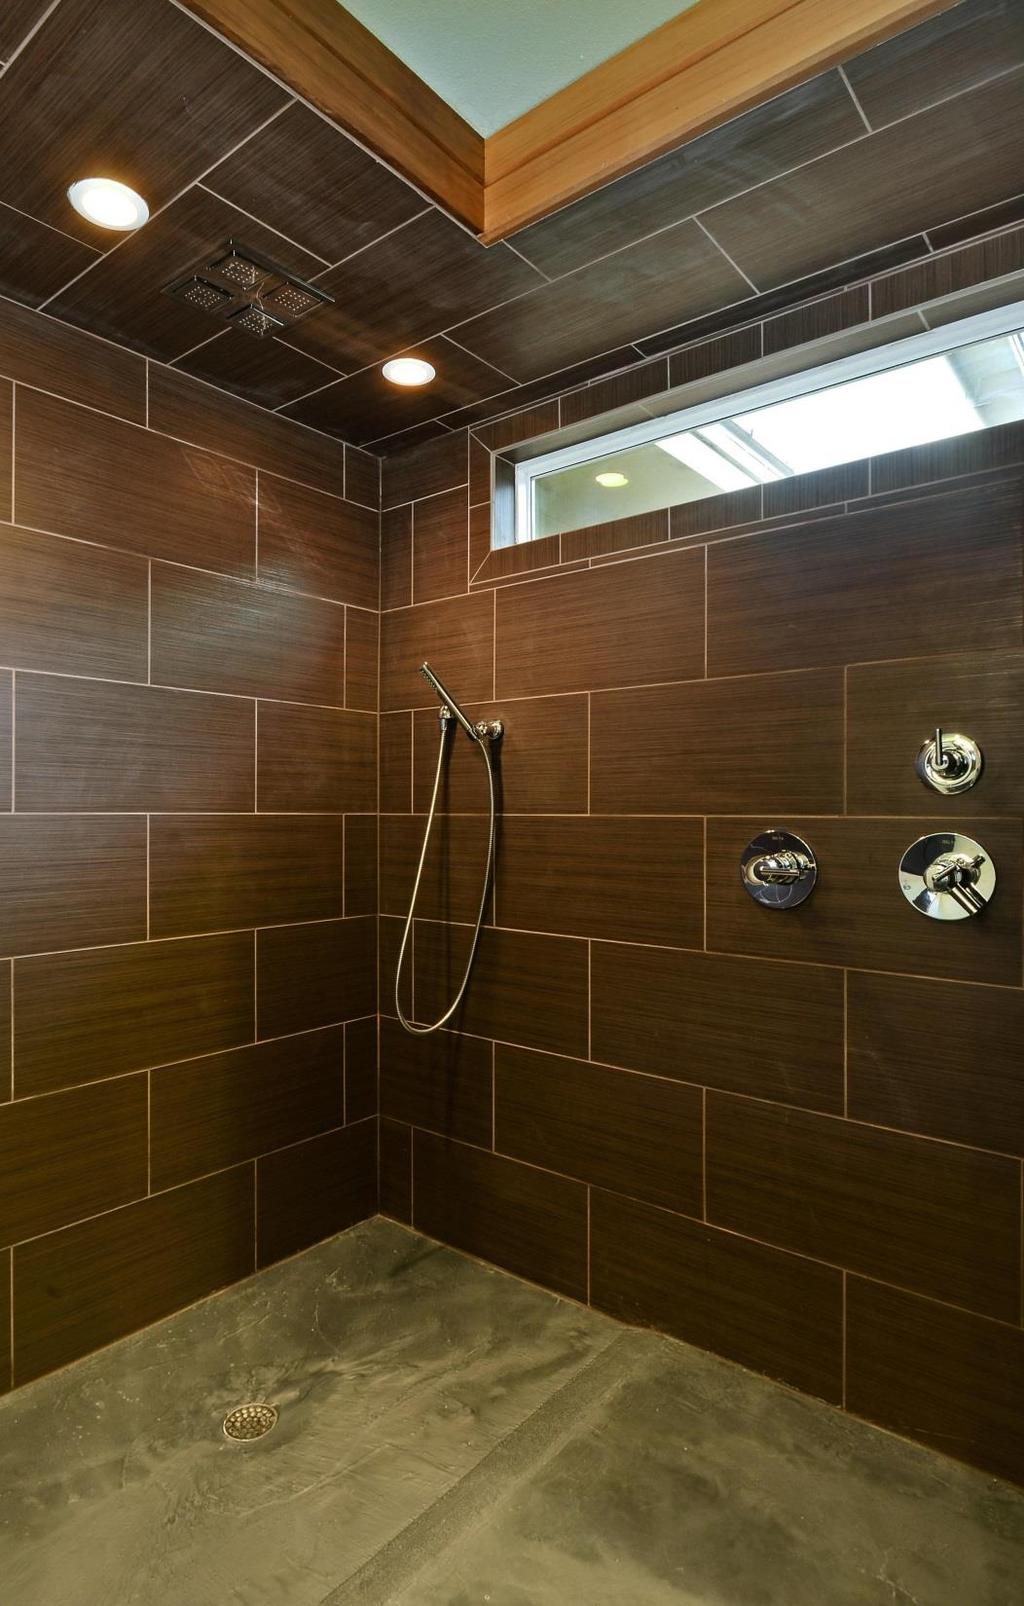 Recessed lighting added in shower showcases fixtures and